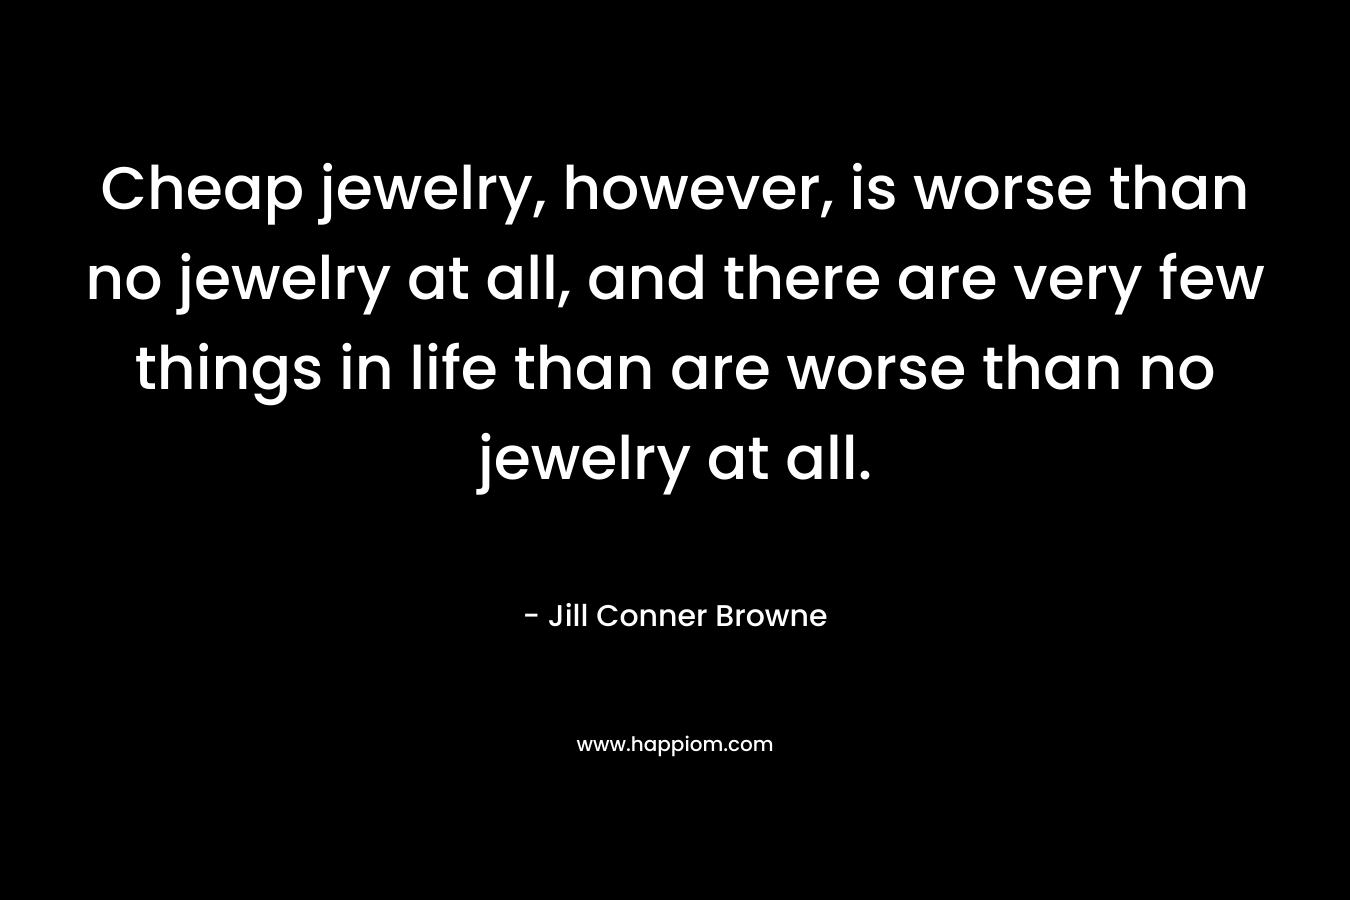 Cheap jewelry, however, is worse than no jewelry at all, and there are very few things in life than are worse than no jewelry at all.